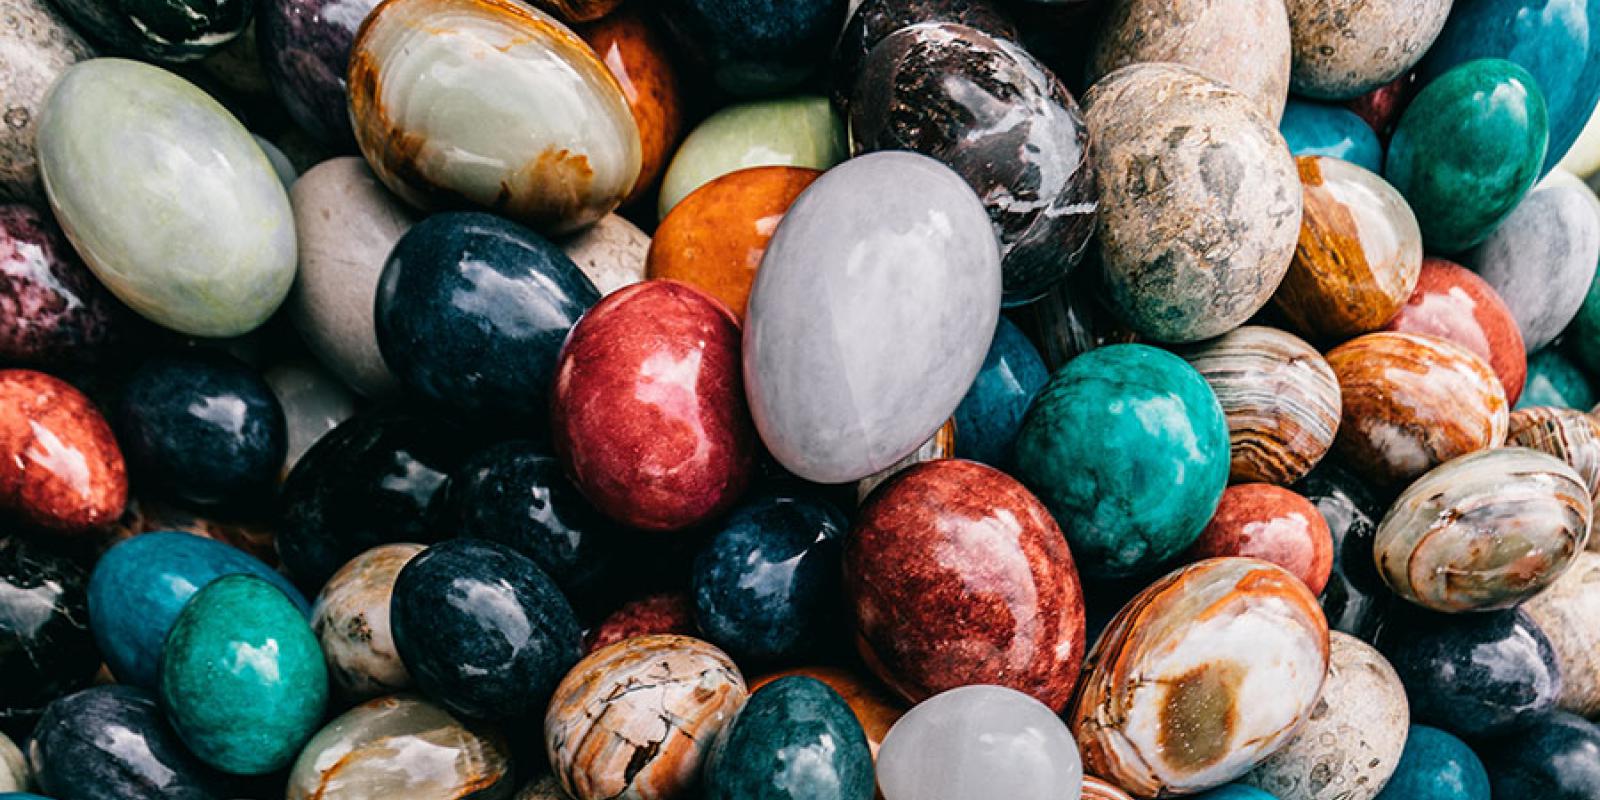 picture of polished stones. Photo by Meruyert Gonullu from Pexels